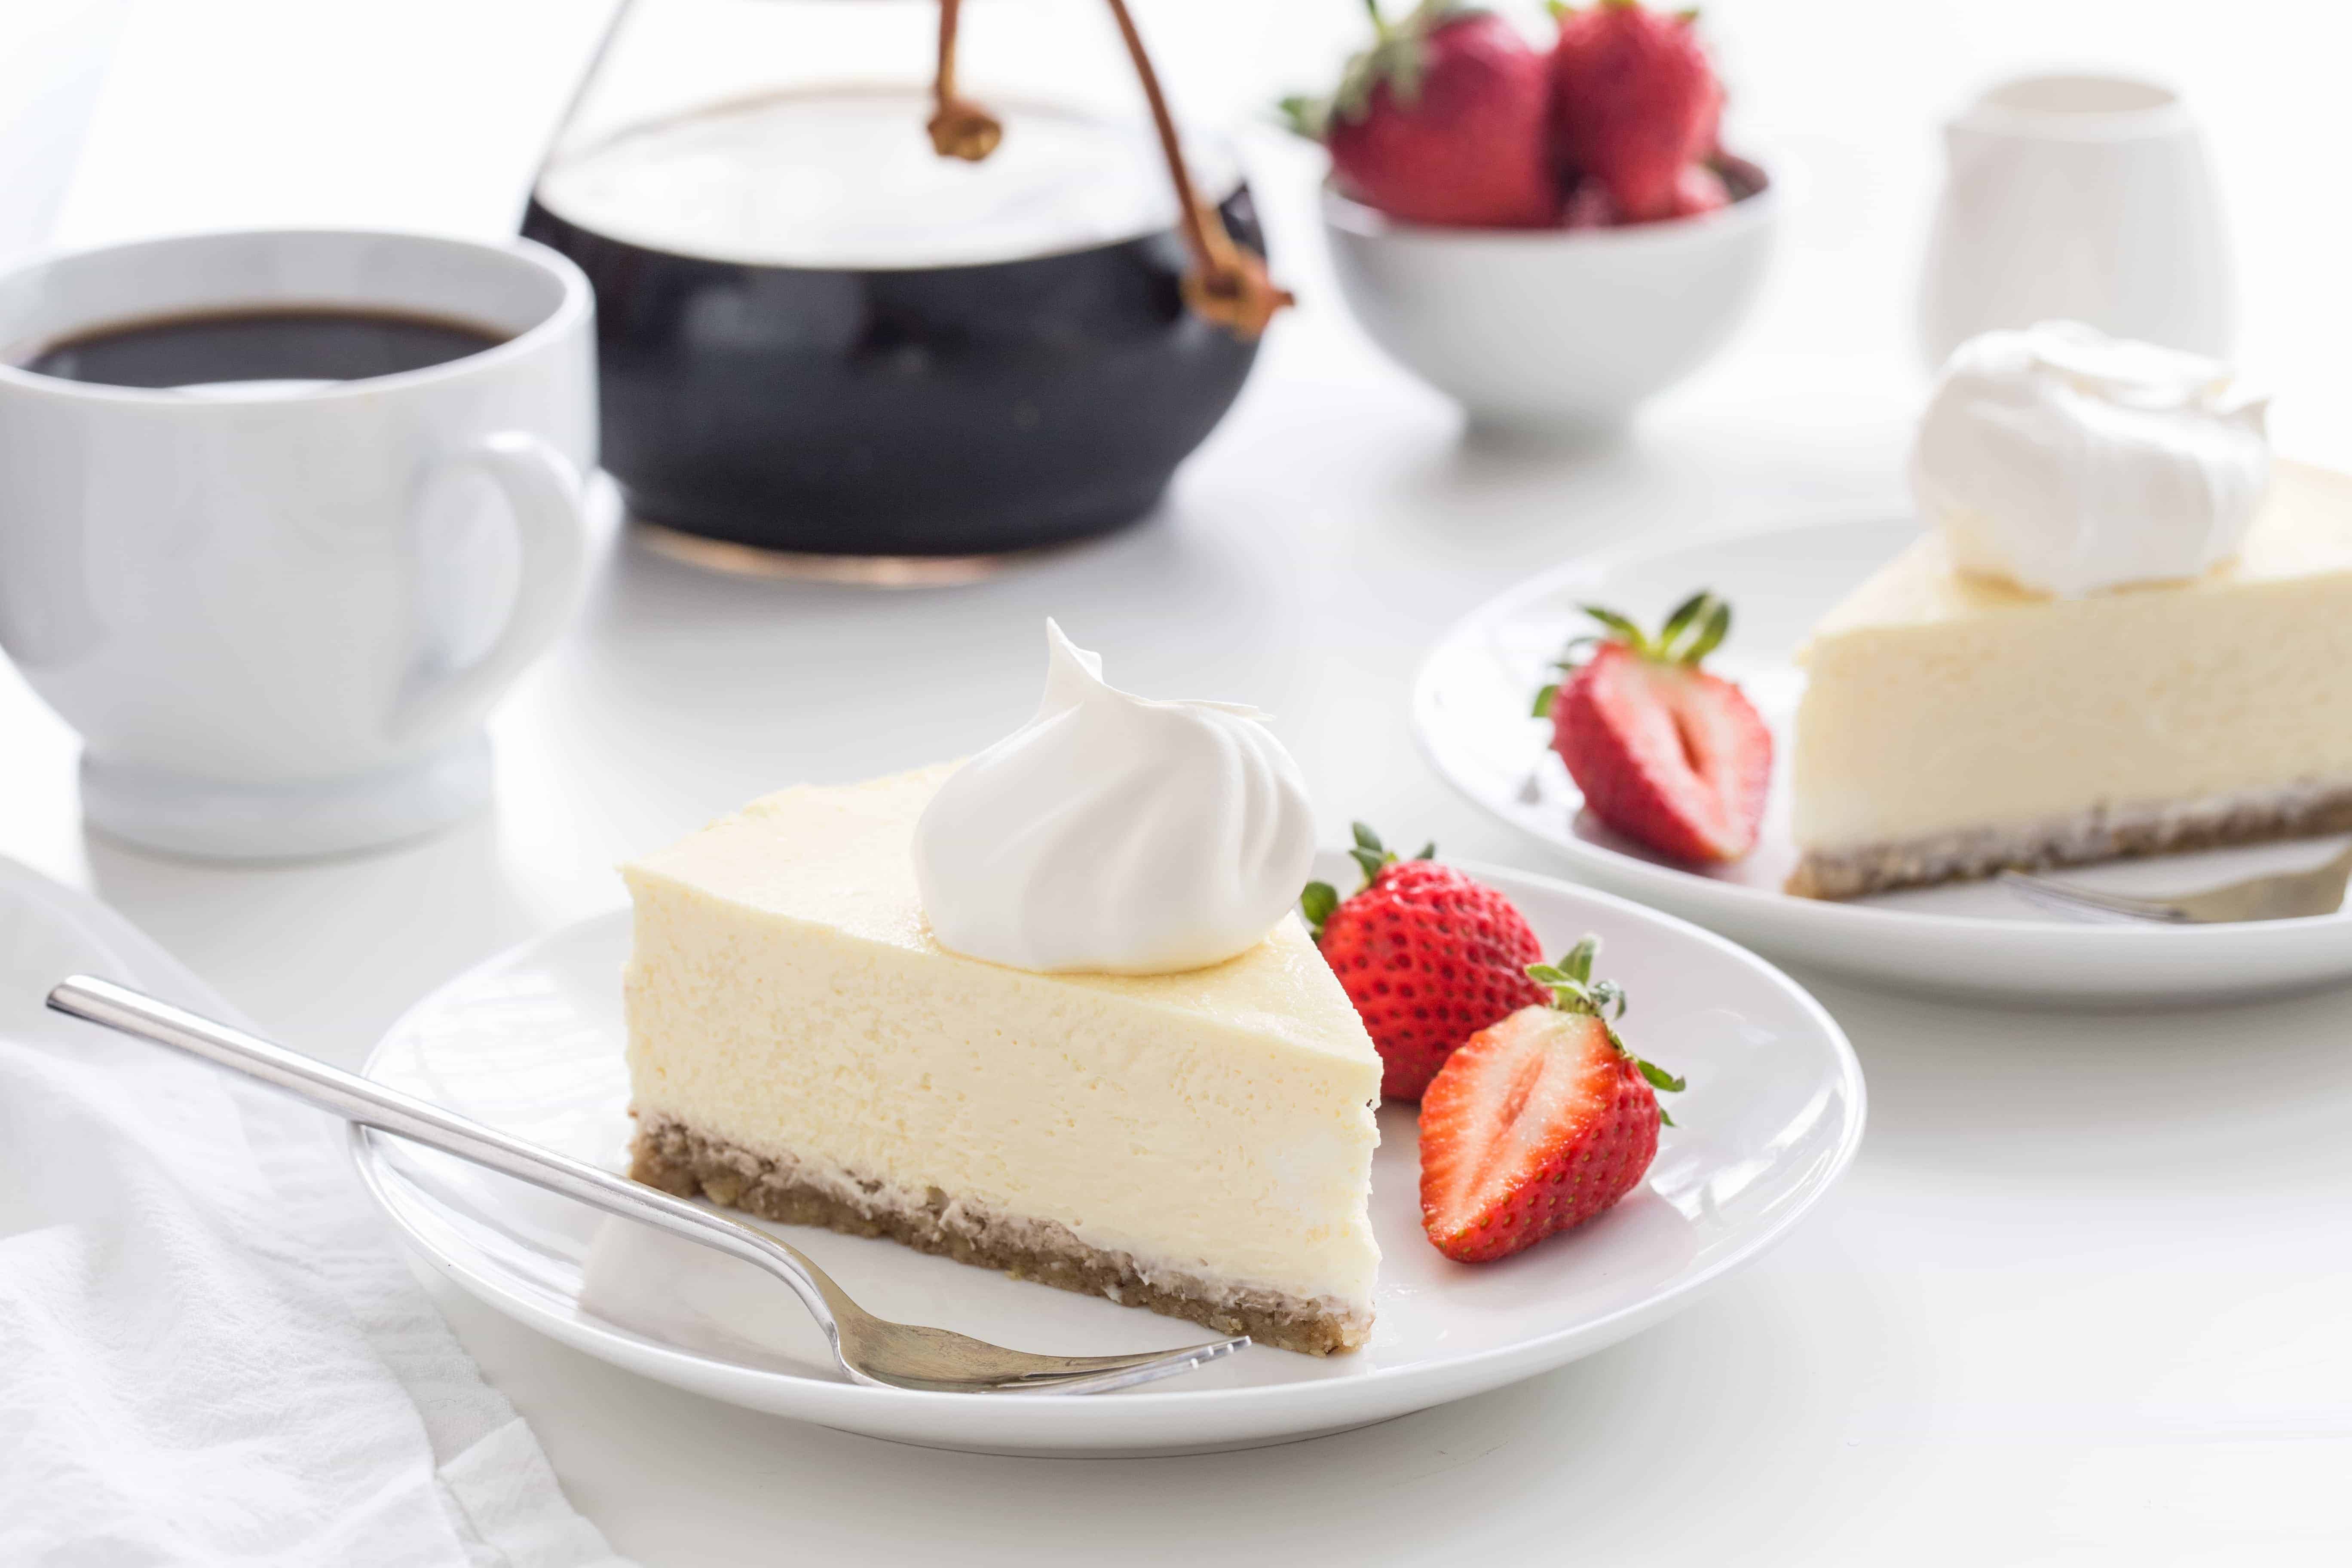 Low Carb Cheesecake is perfectly creamy and delicious without added sugar. The walnut crust makes it extra special. 